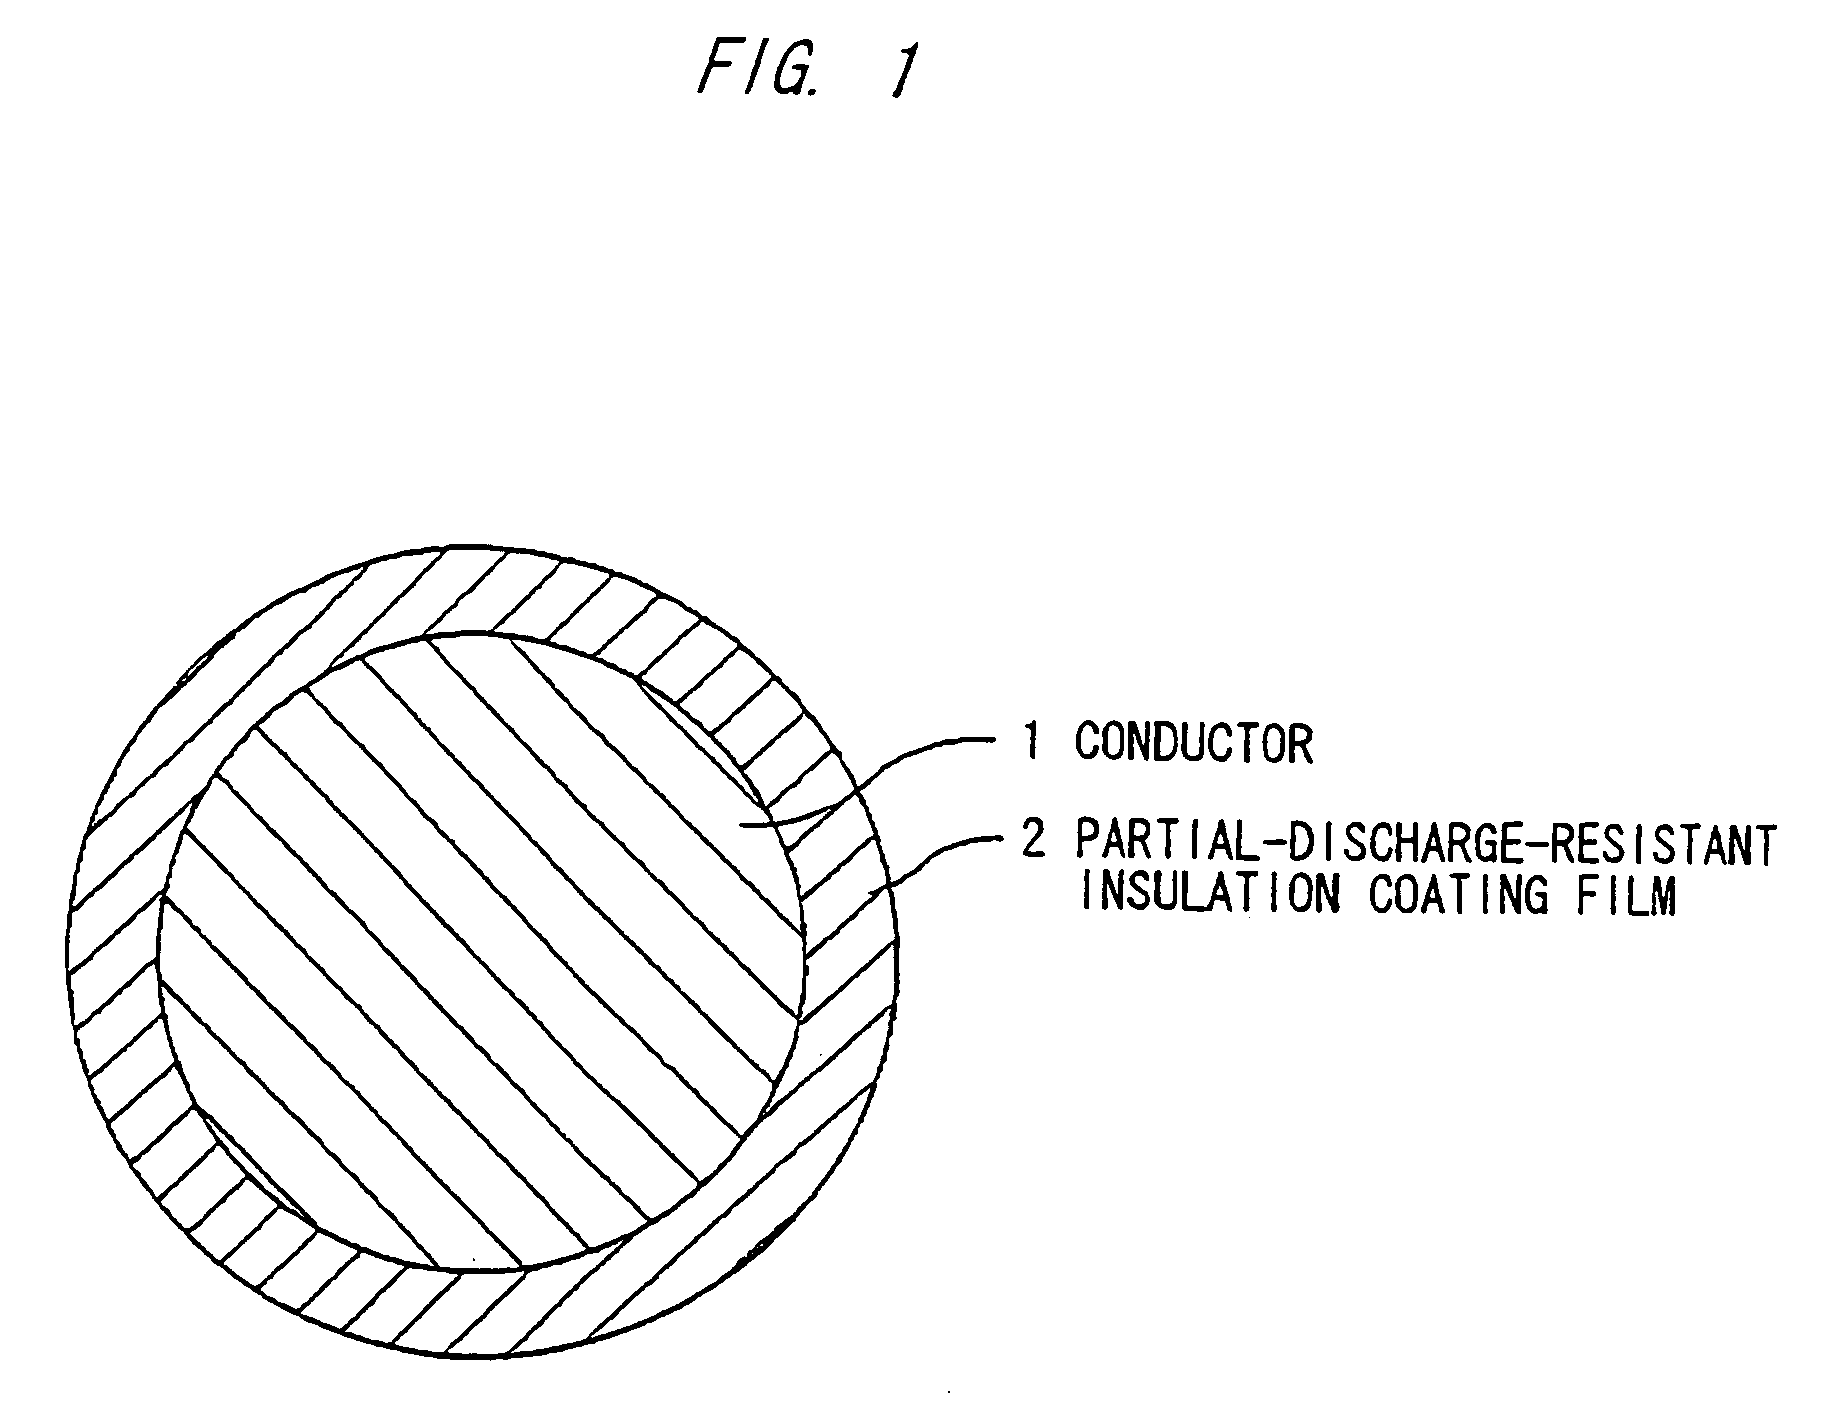 Polyamide-imide resin insulating coating material, insulated wire and method of making the same